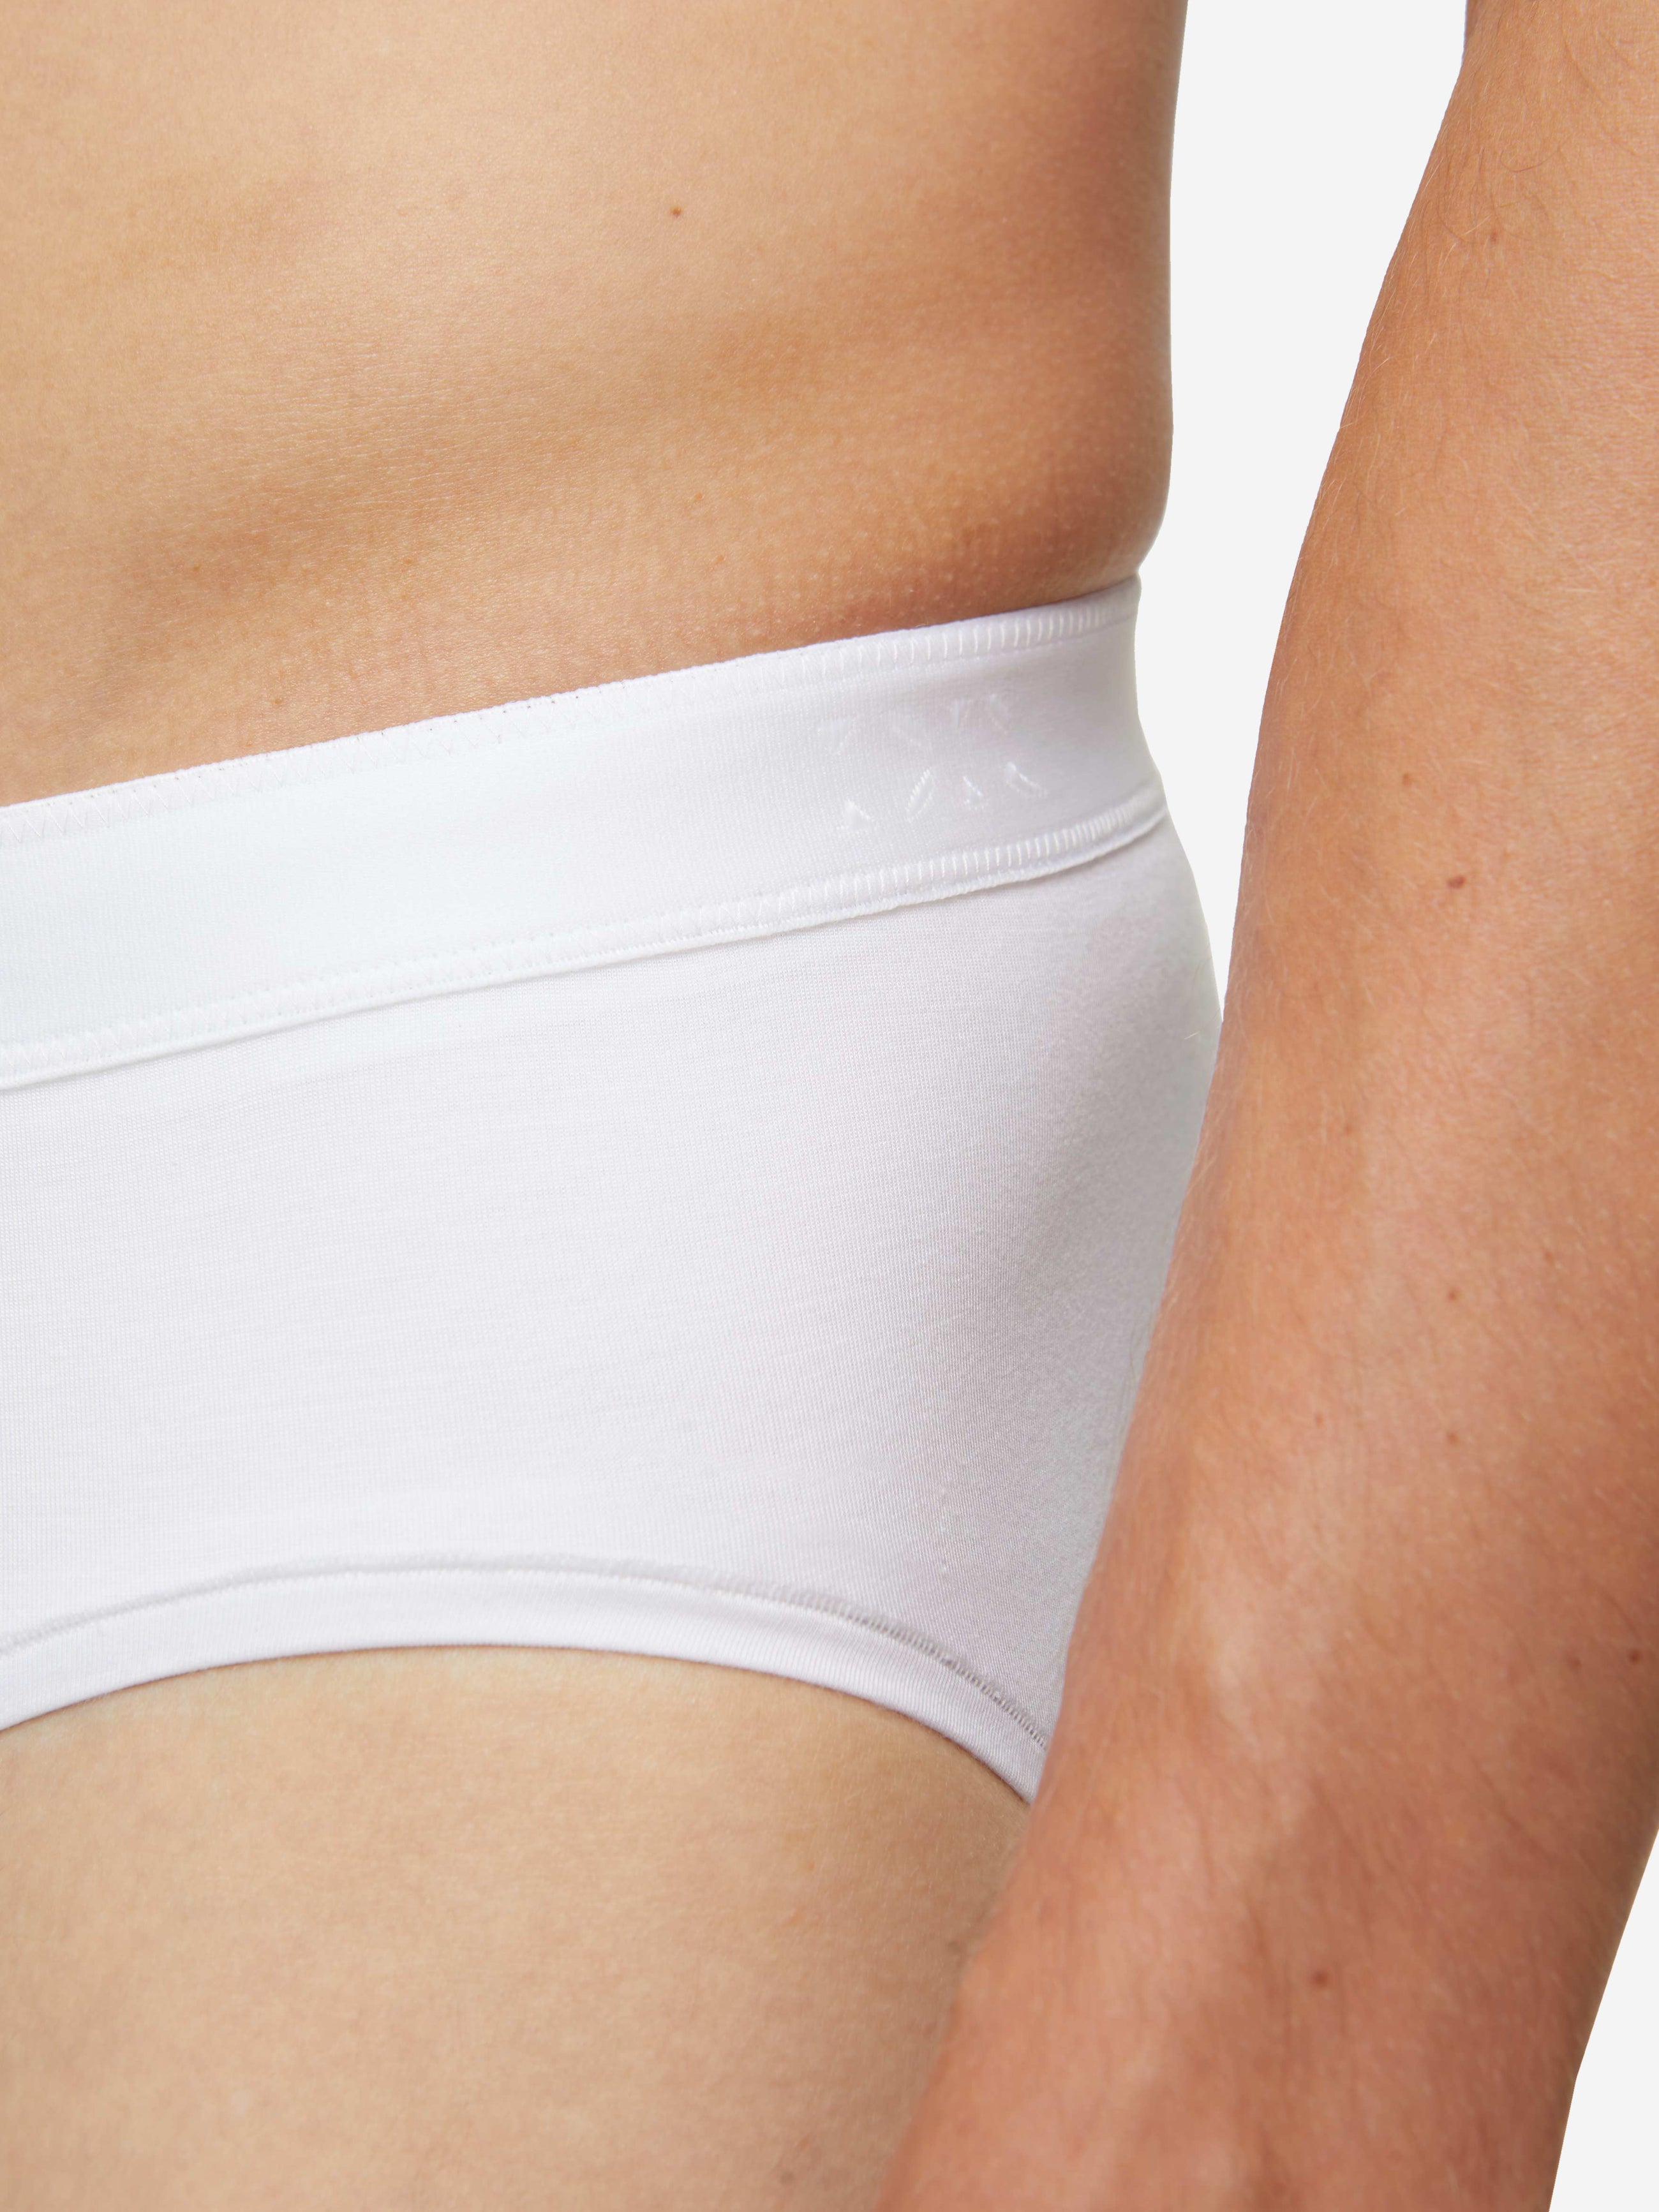 33 sustainable underwear brands UK for every price point